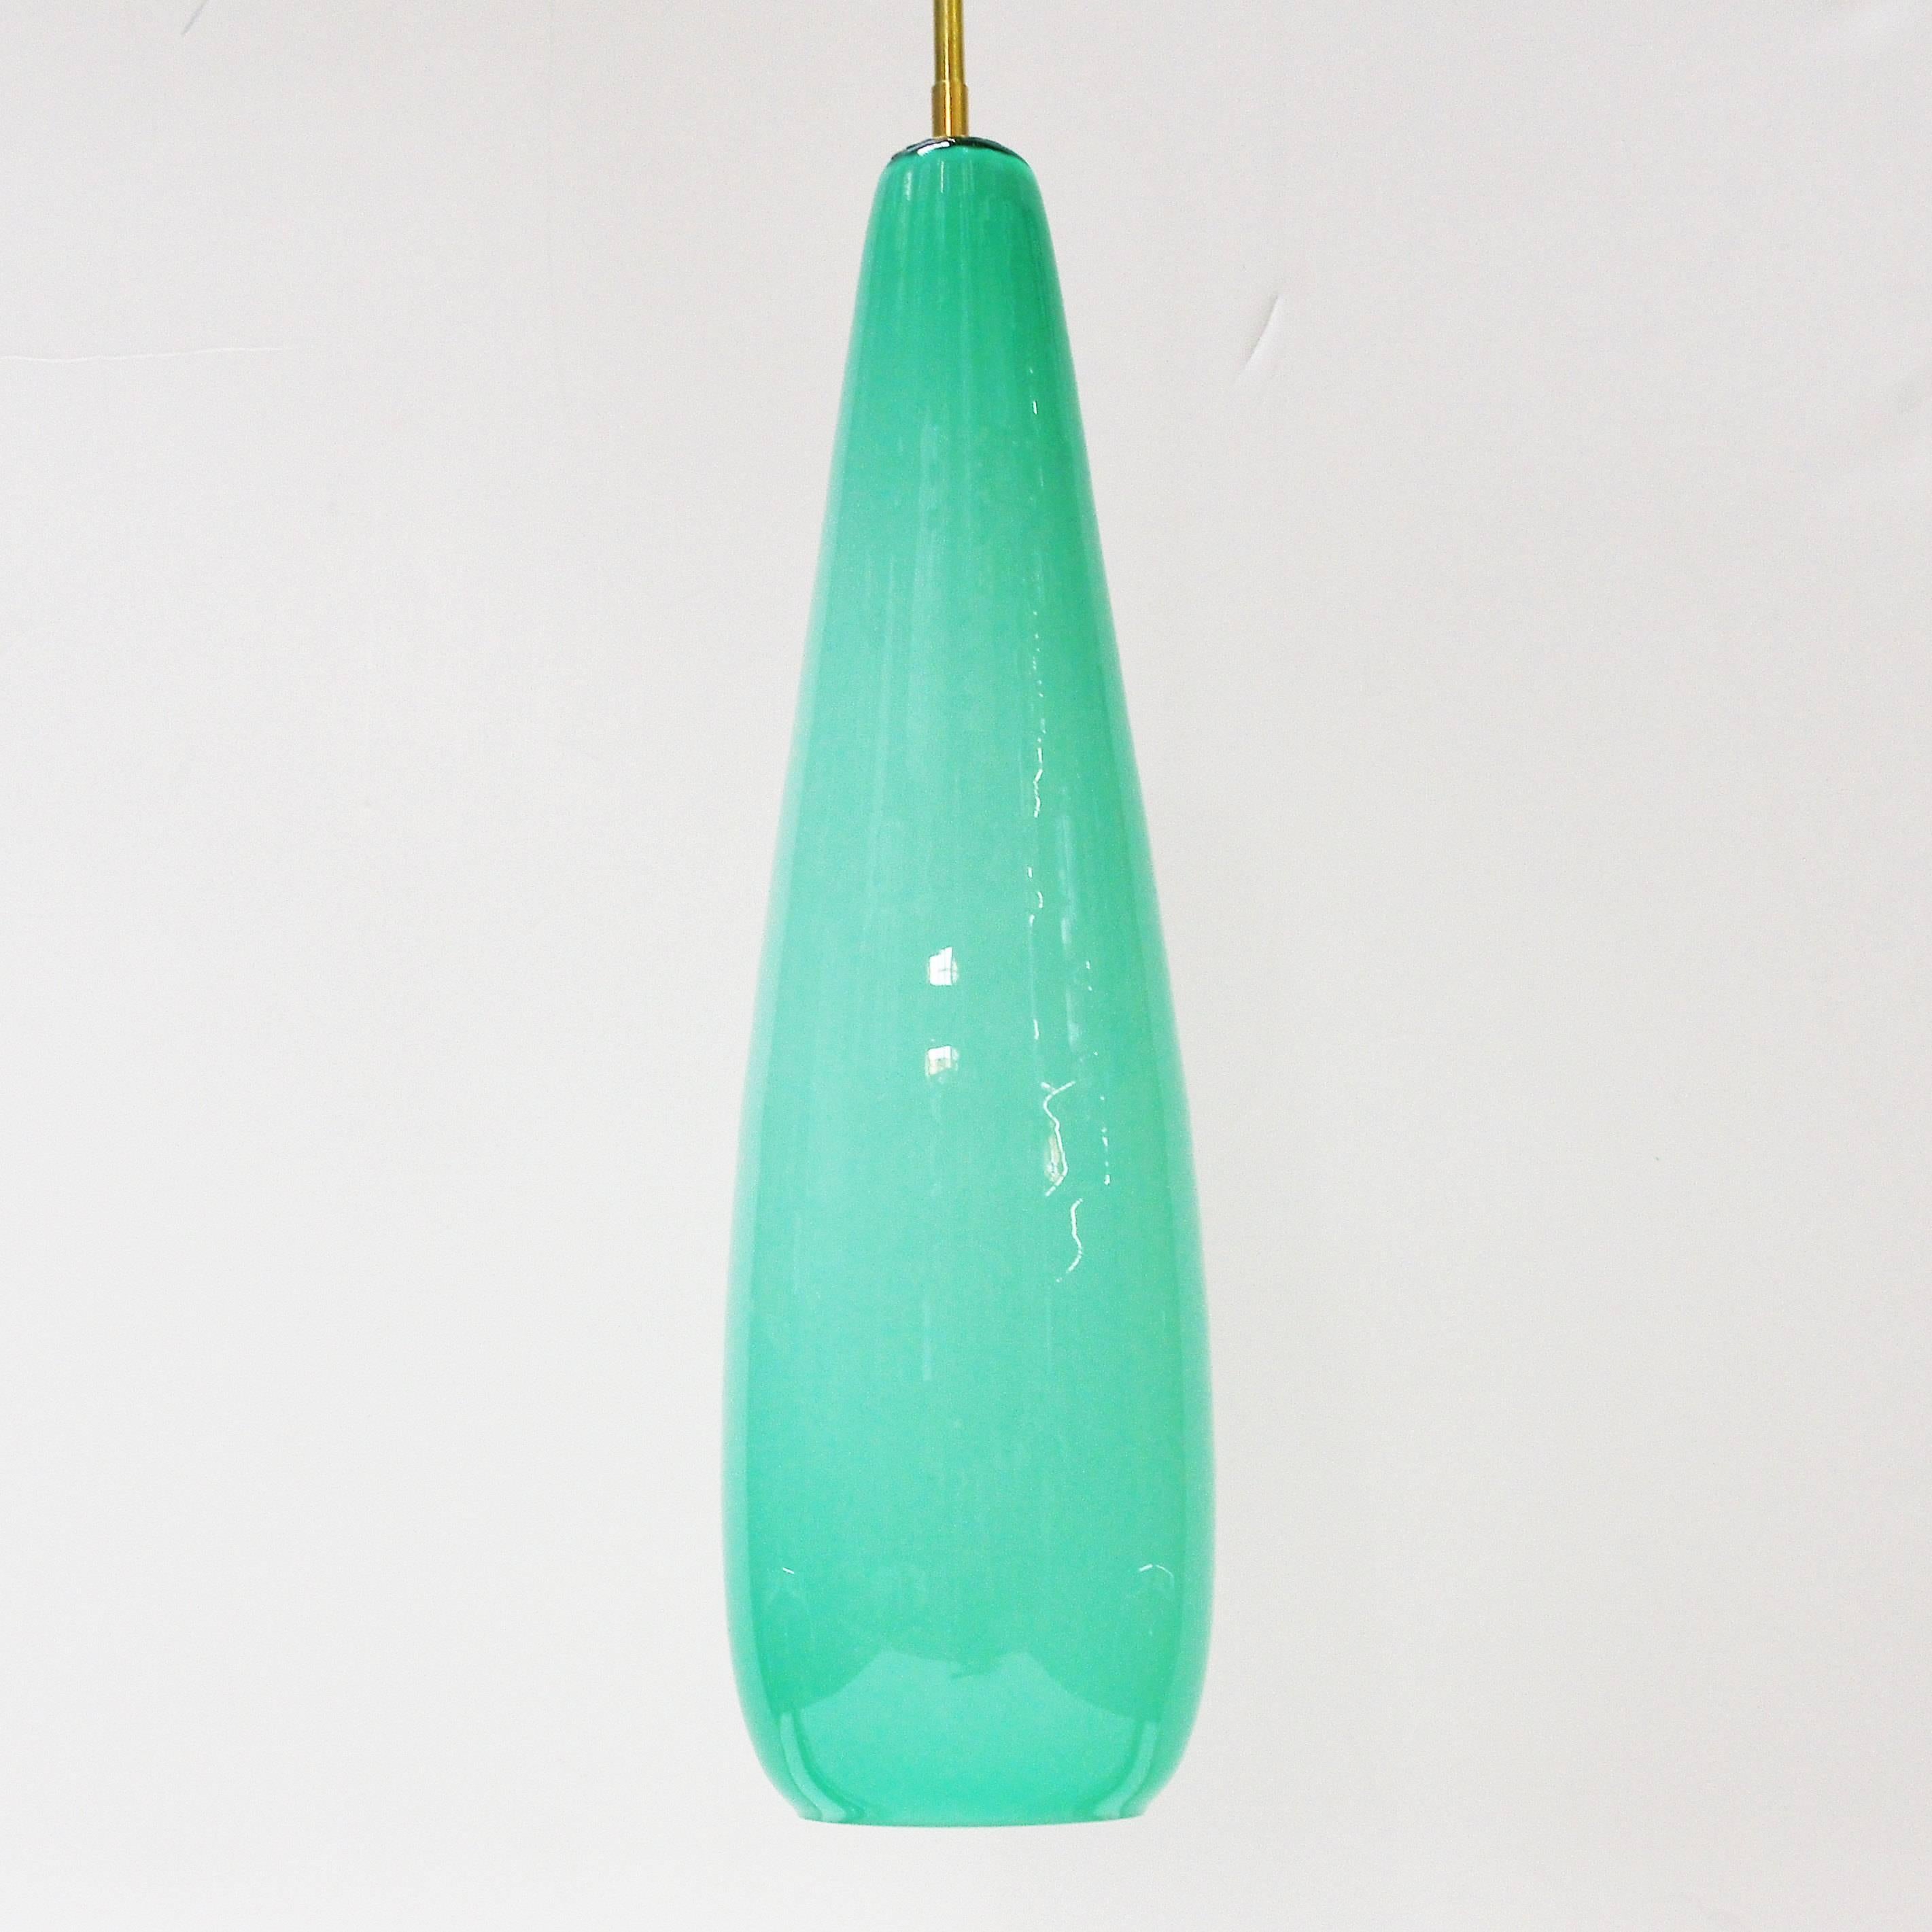 Vintage Italian pendant with hand blown Murano glass frosted white interior and turquoise exterior using Incamiciato technique, mounted on brass hardware / Designed by Leucos, circa 1970s or Made in Italy
1 light / max 60W
Measures: Height: 45